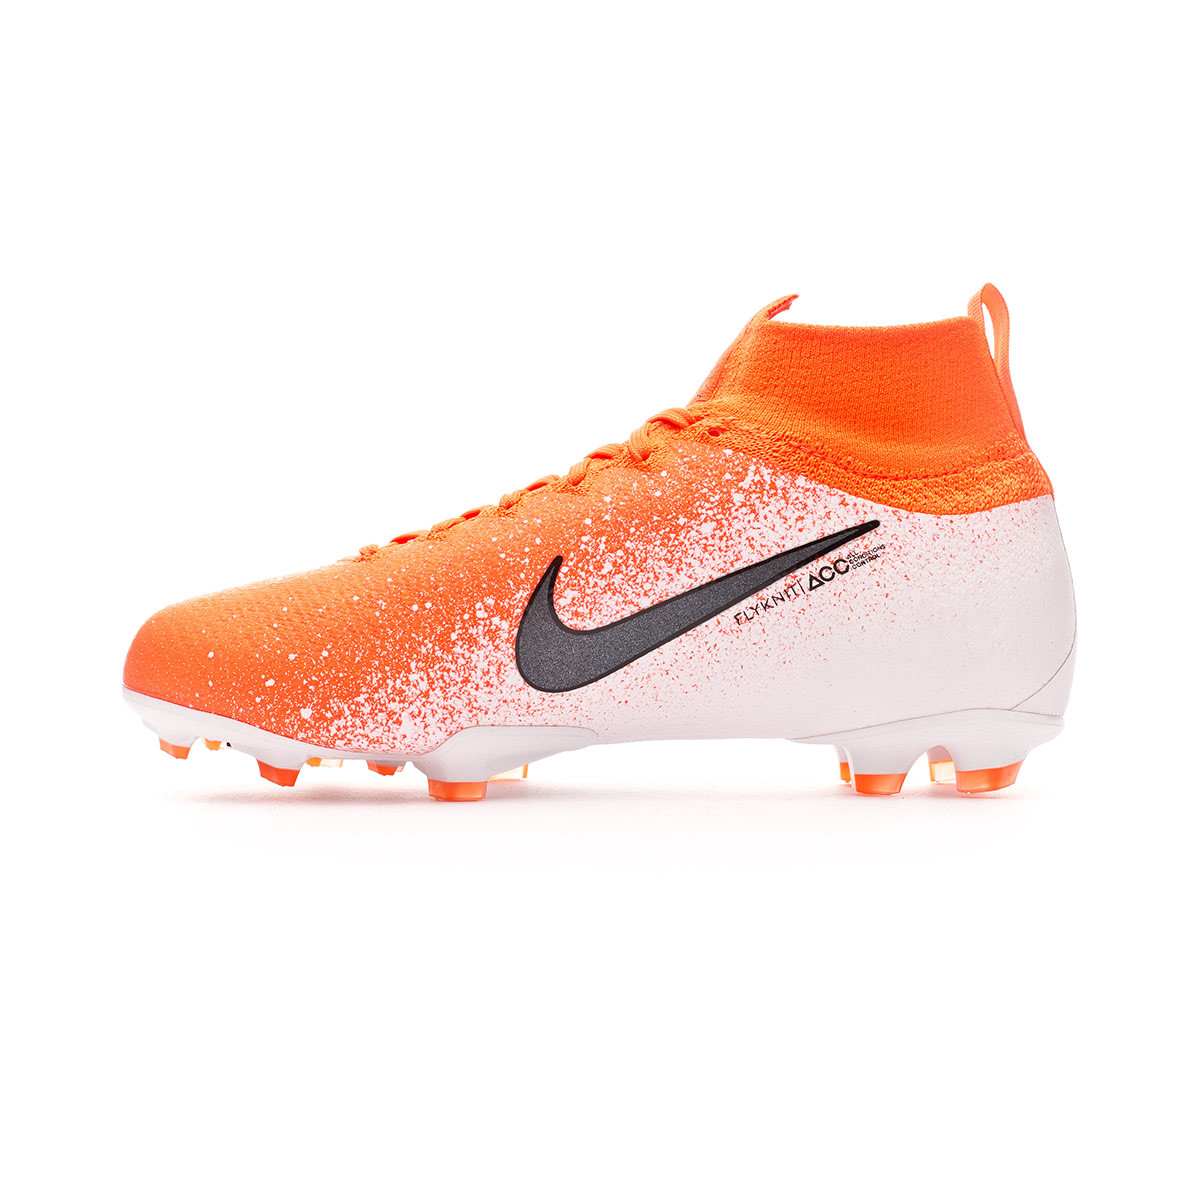 Details about Nike Mercurial Superfly 6 Elite FG Soccer Cleats.